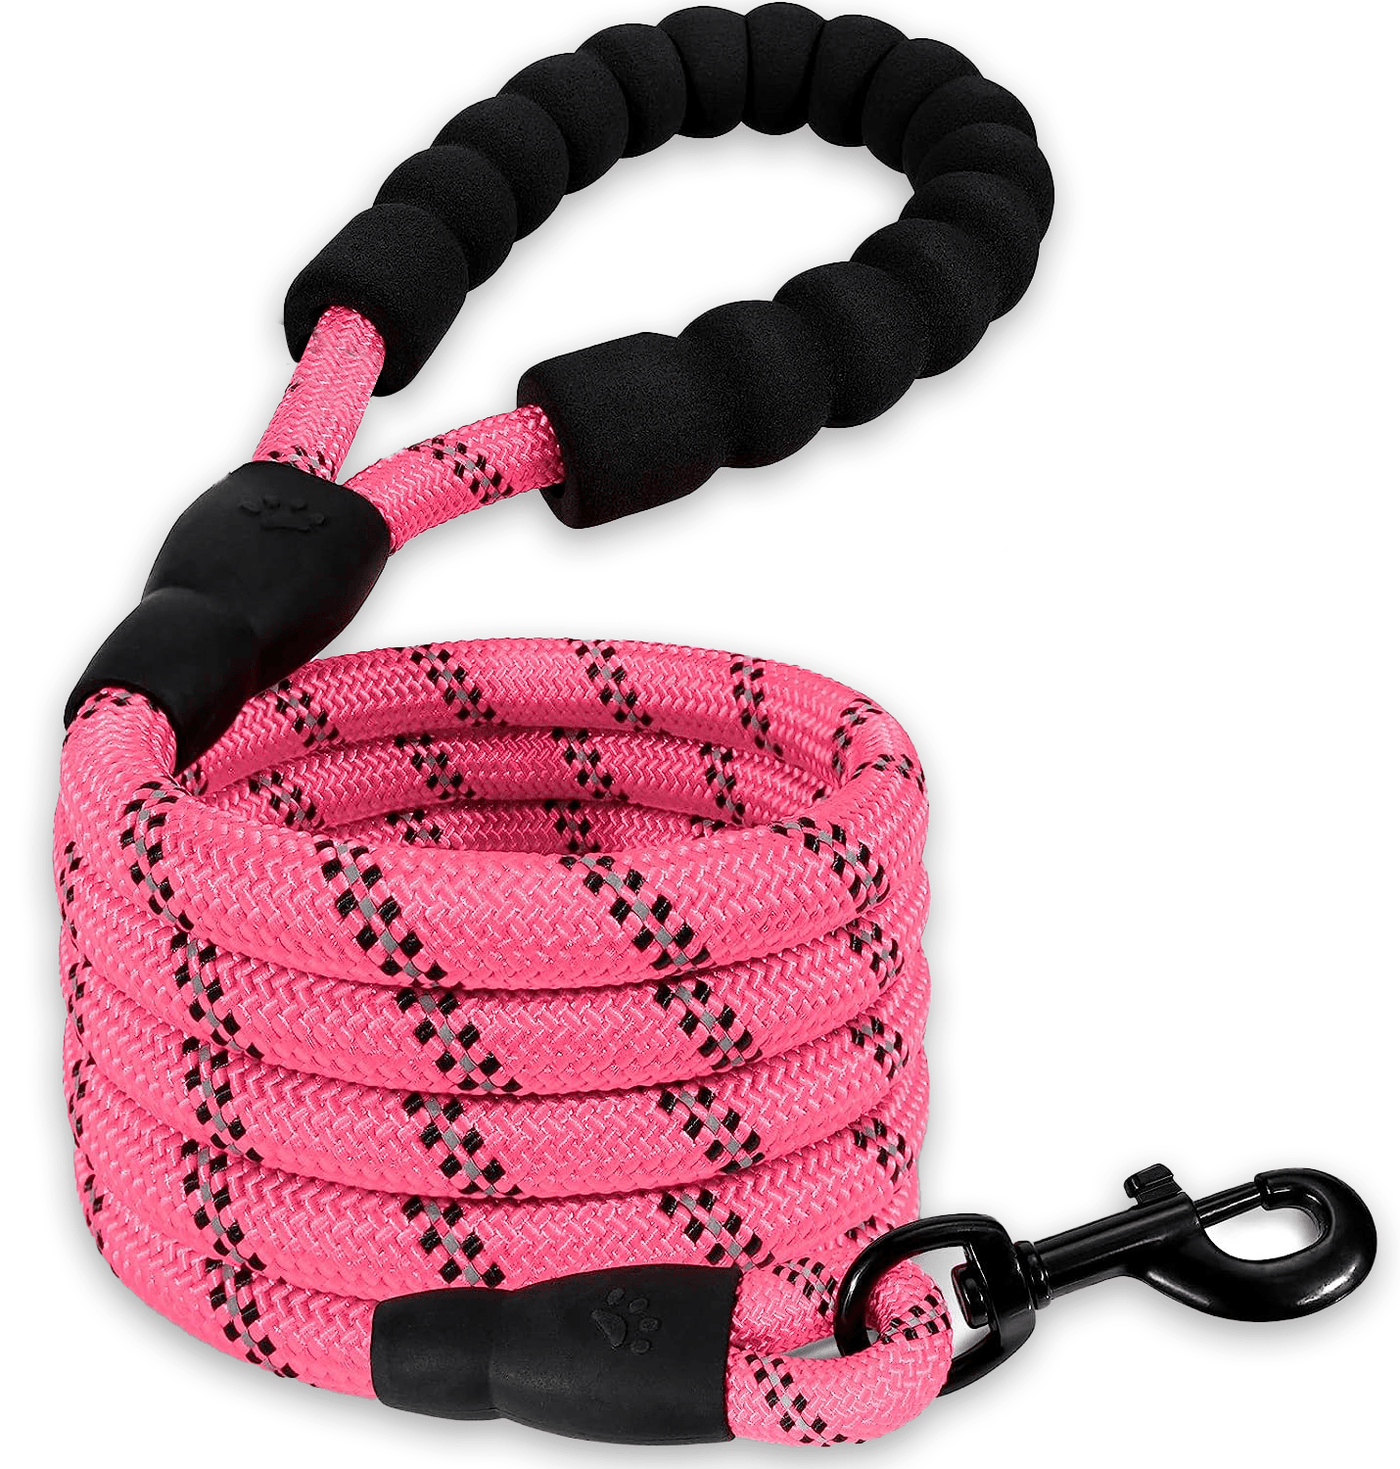 The best dog leash 